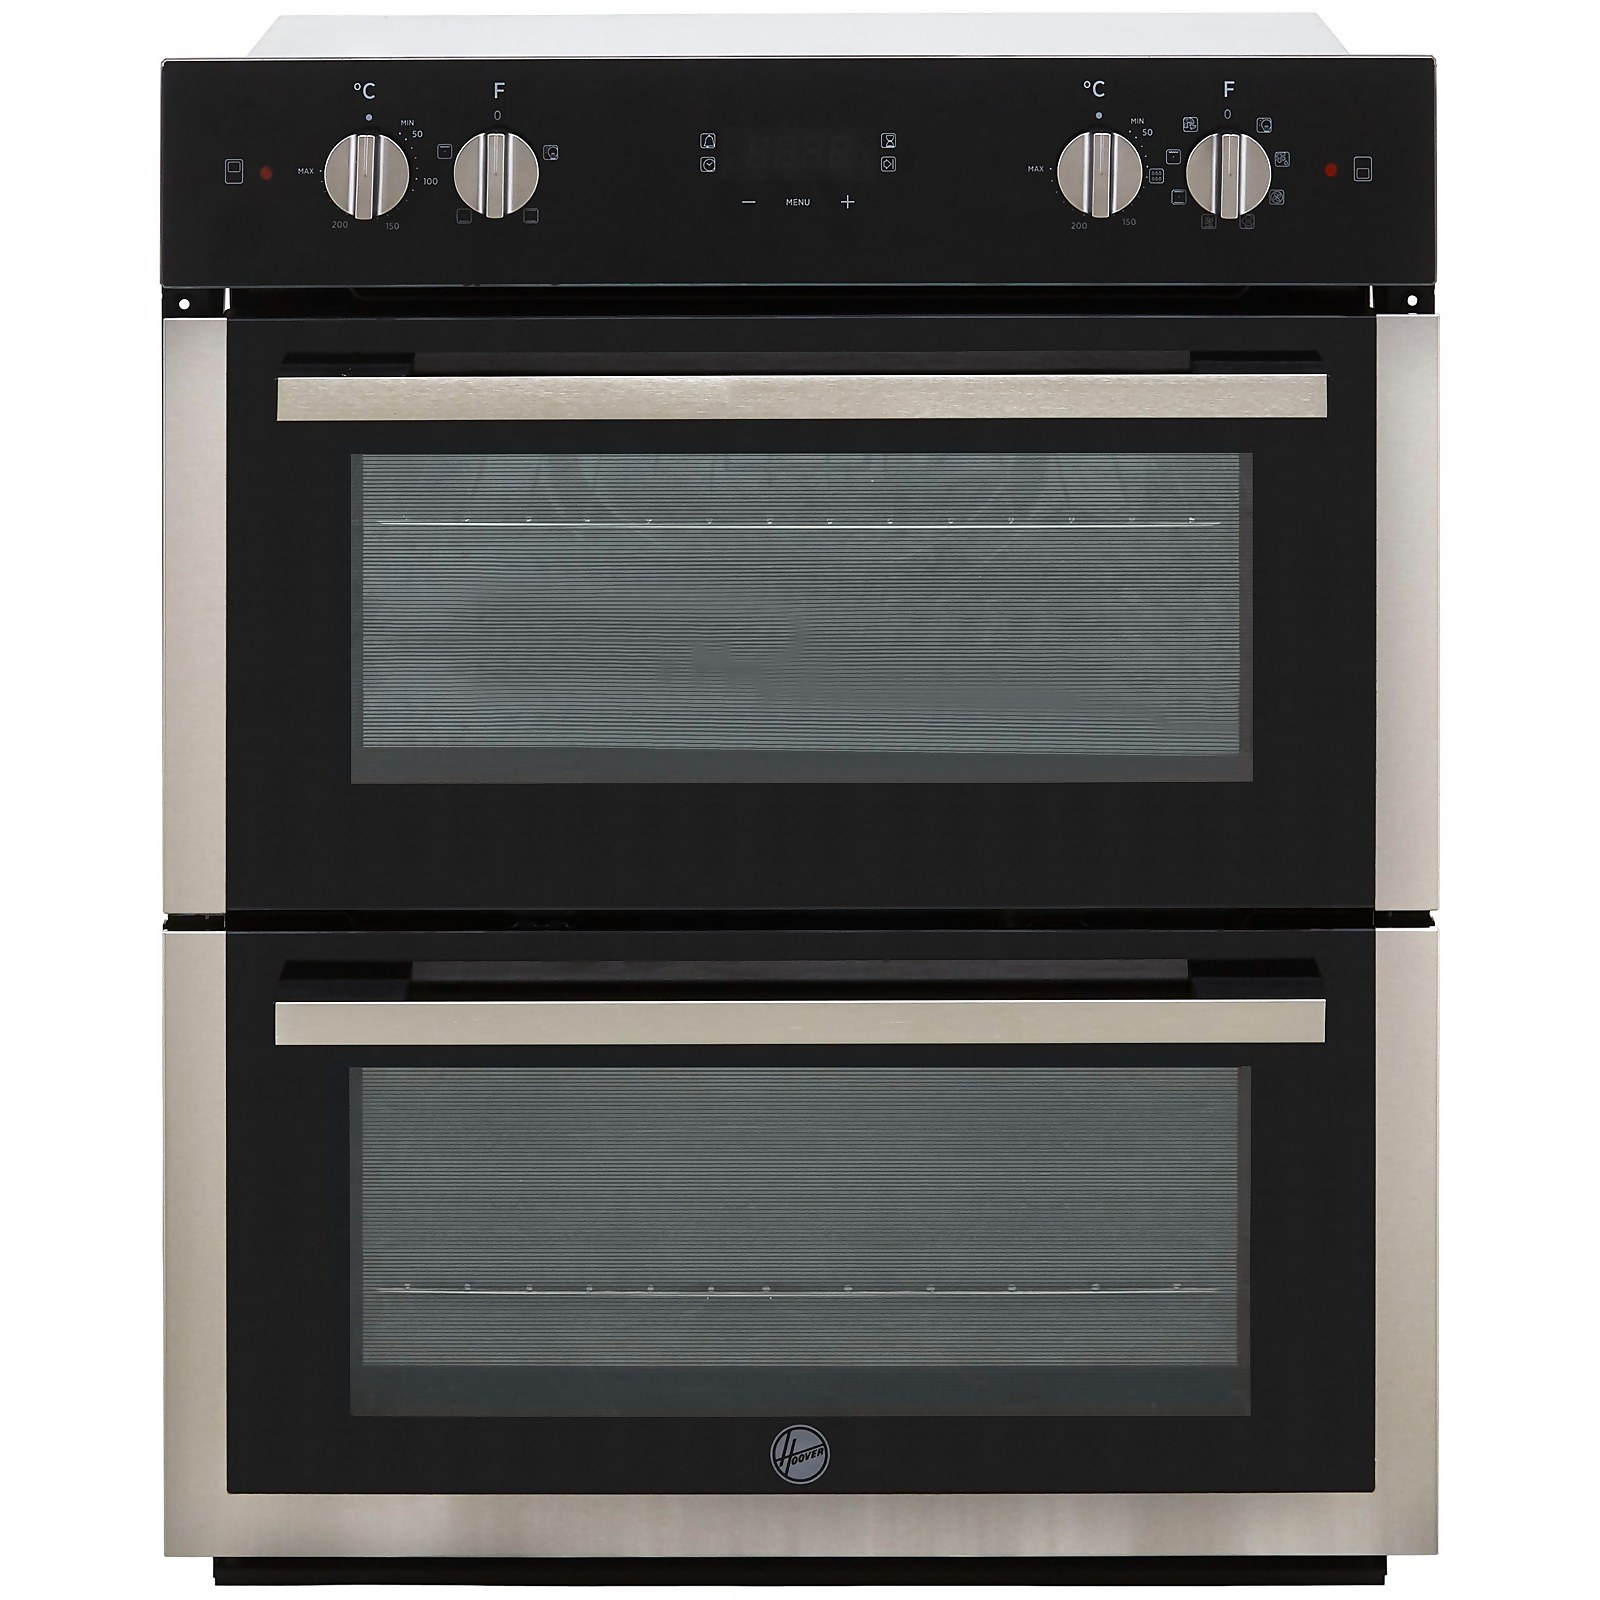 Photo of Hoover H-oven 300 Ho7dc3ub308bi Built Under Electric Double Oven - Black / Stainless Steel - A/a Rated